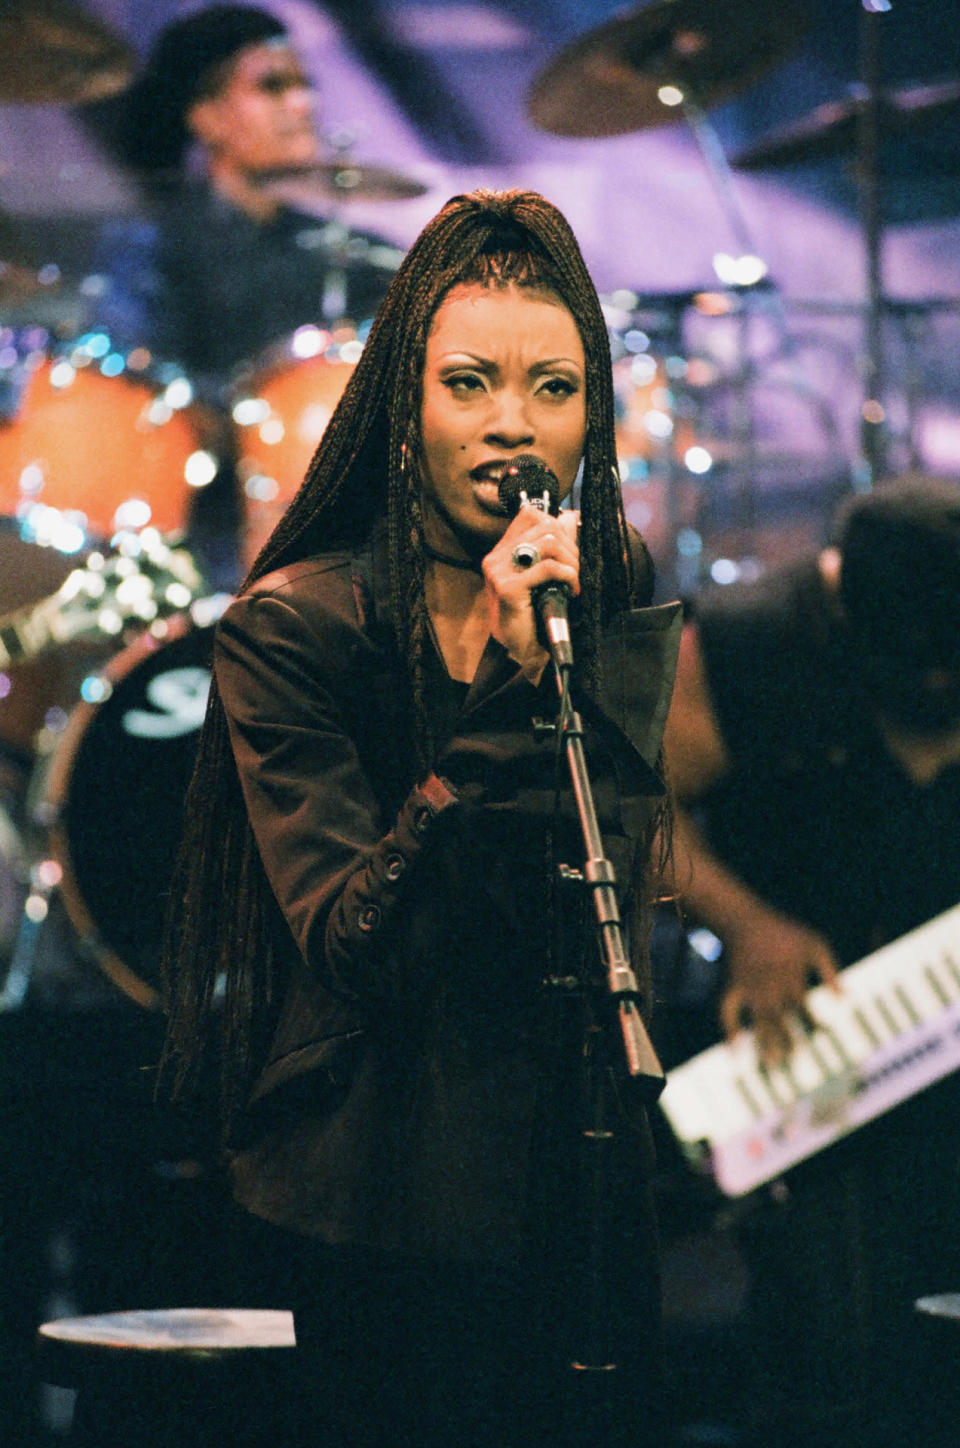 Charmayne “Maxee” Maxwell was part of the 90s R&B group Brownstone. She died Feb. 27 at age 46 from a fall.